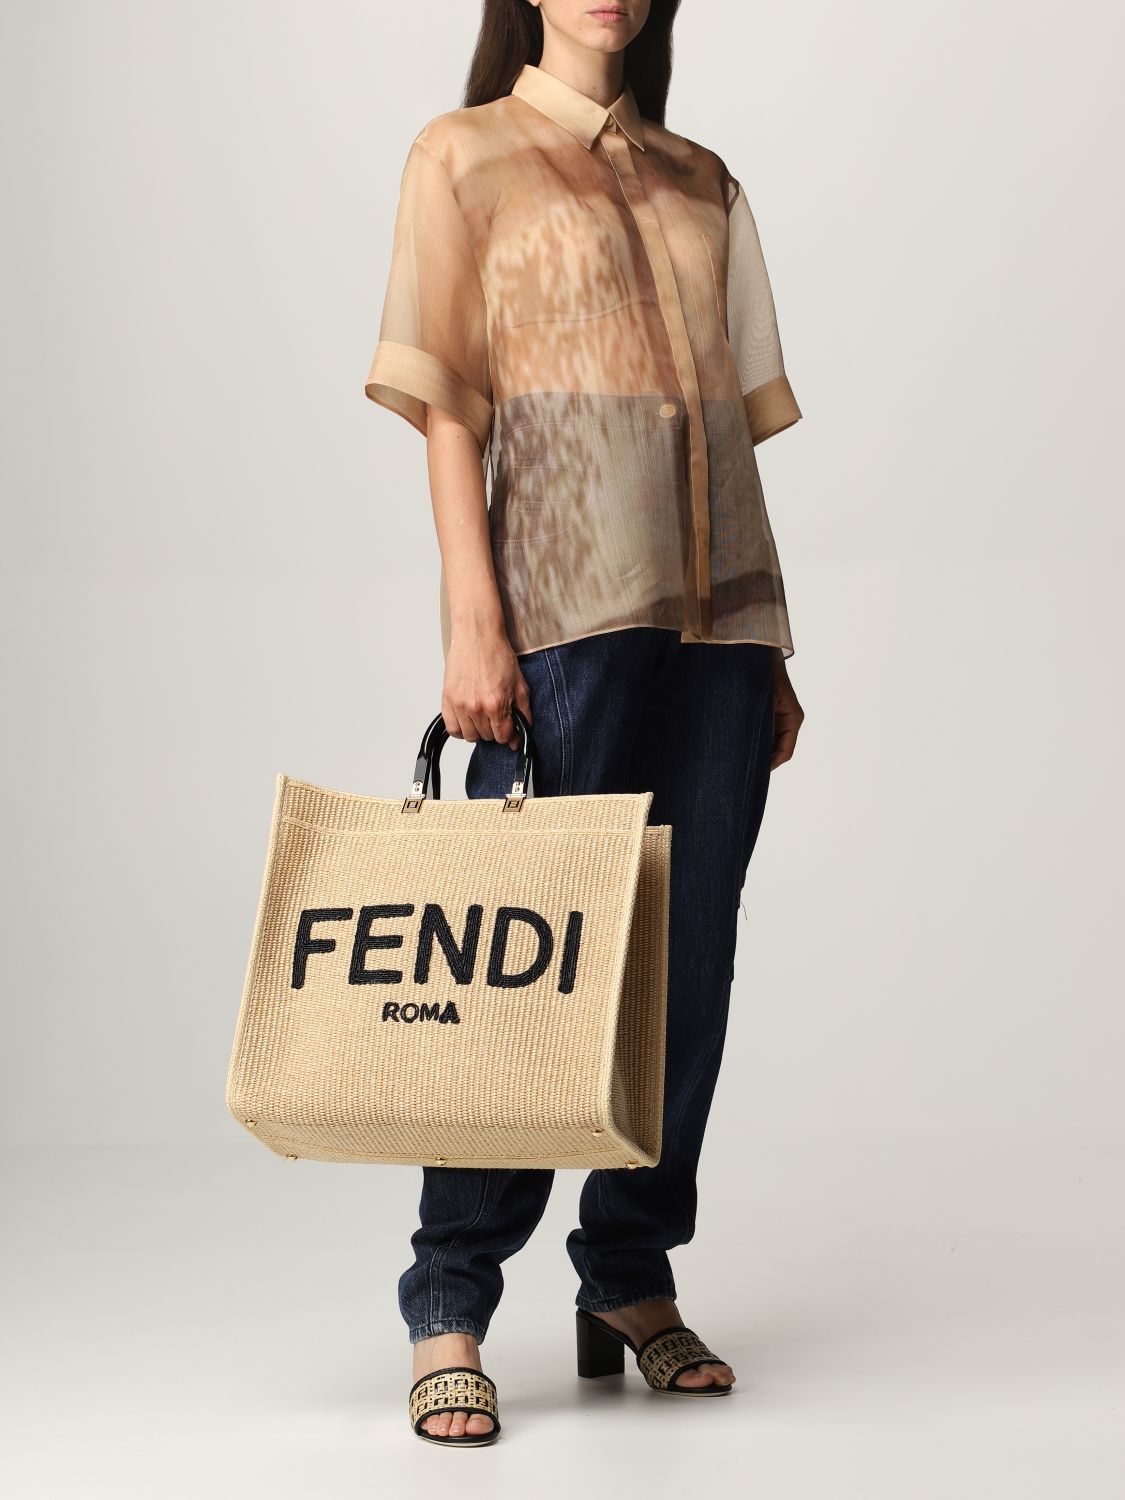 FENDI: Sunshine bag in woven straw with big Roma logo - Natural | Tote